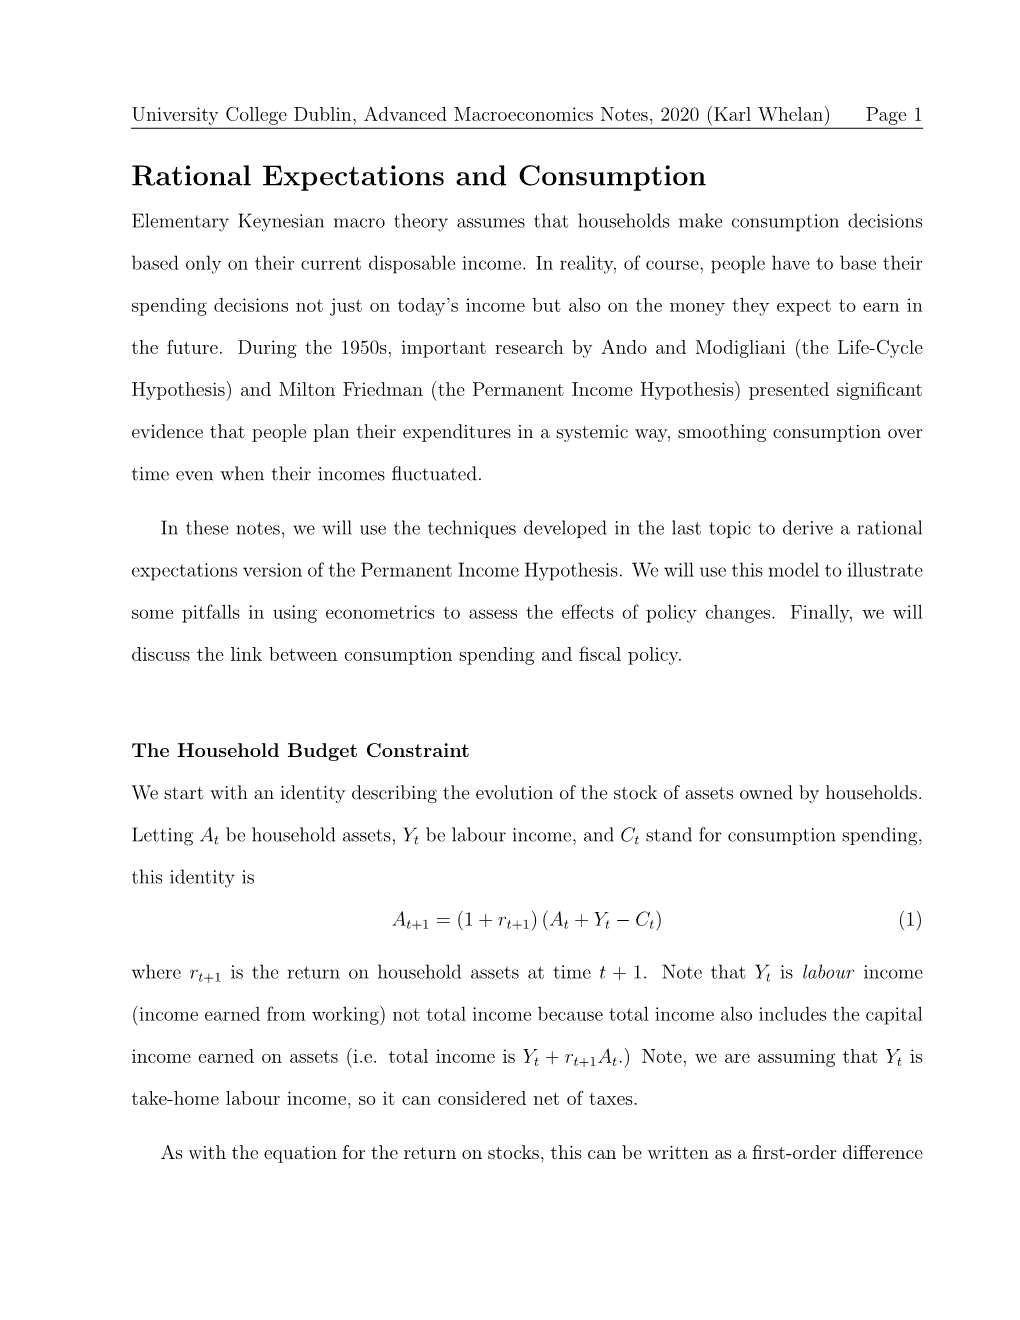 Rational Expectations and Consumption